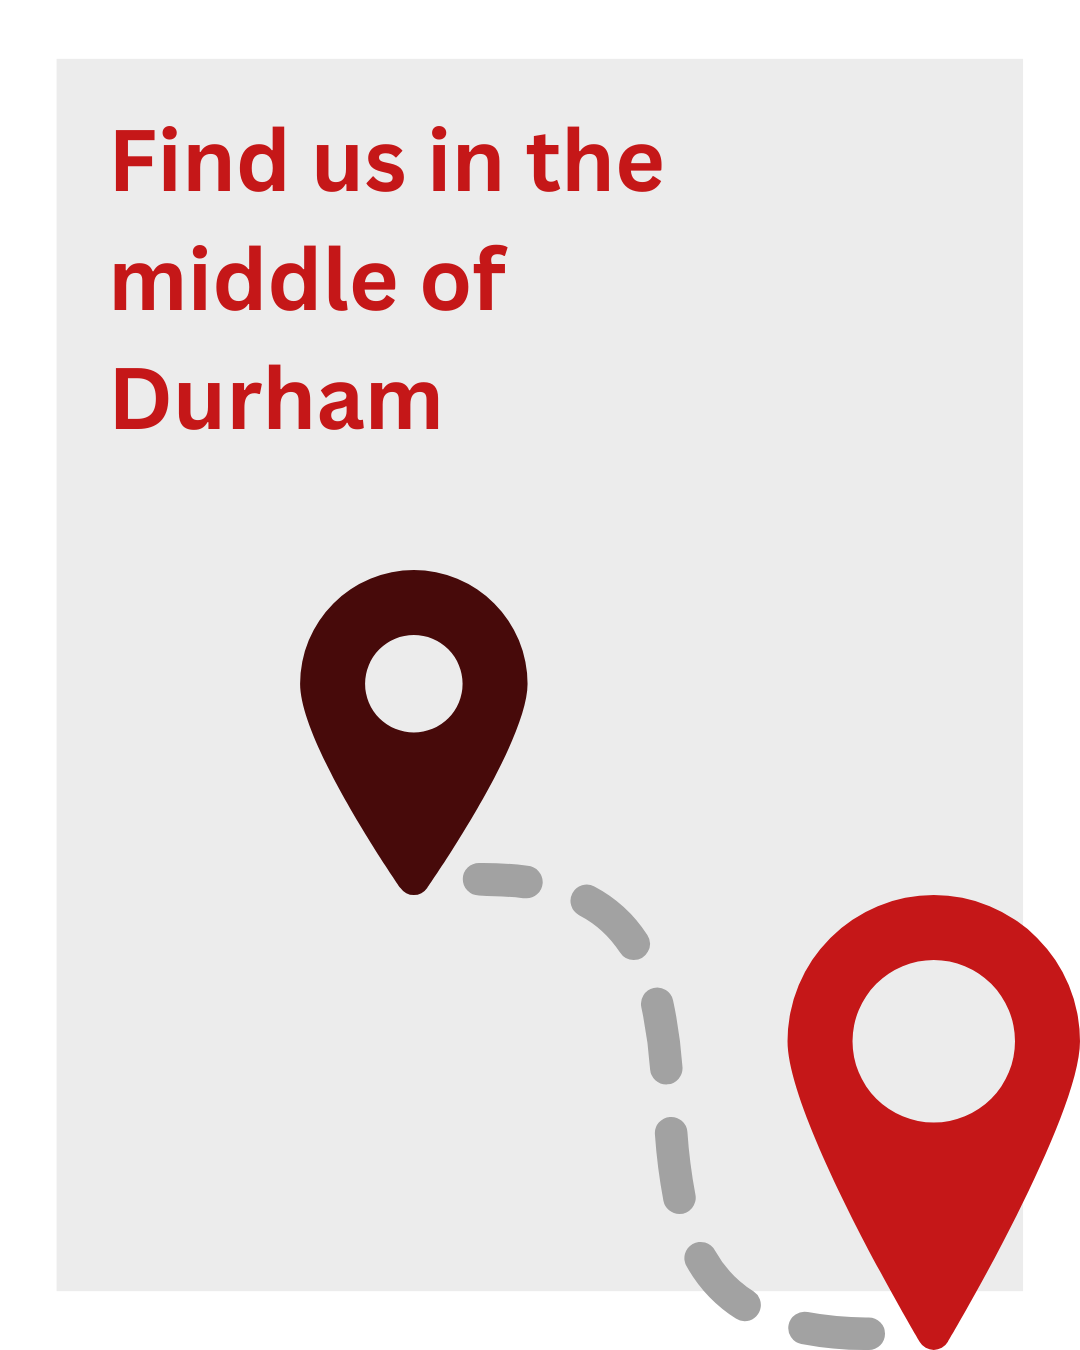 Find us in the middle of Durham. Image shows two map pins joined by a dotted line.